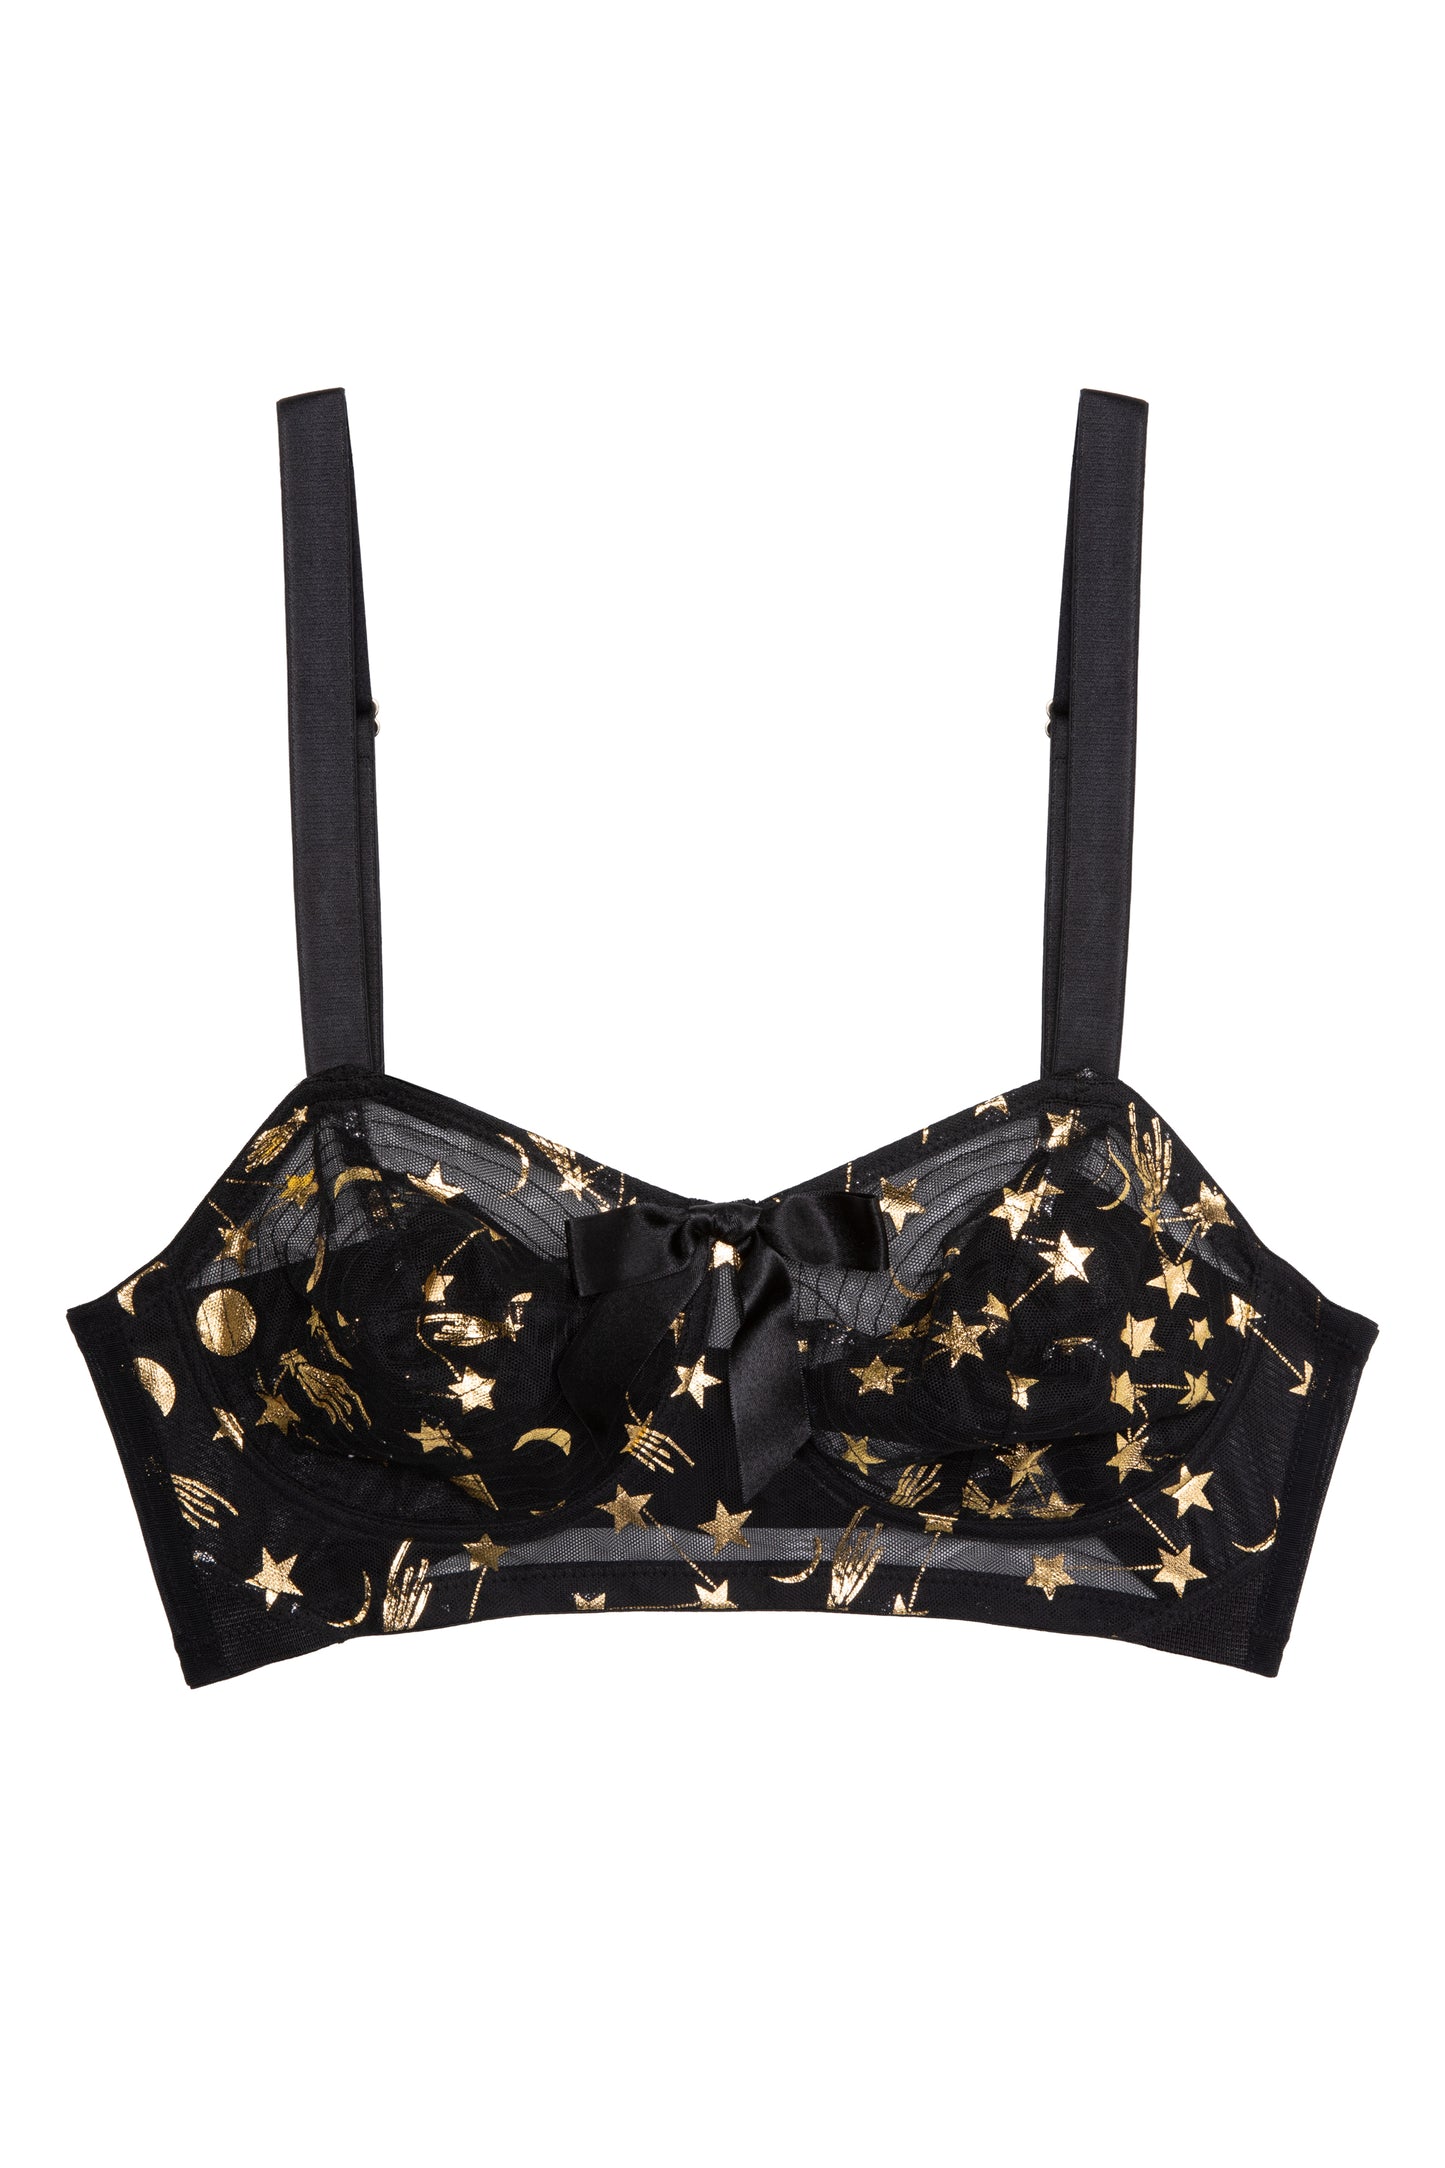 Solar Gold And Black Cosmic Print Bullet Bra By Bettie Page - 32B-42F (UK size)